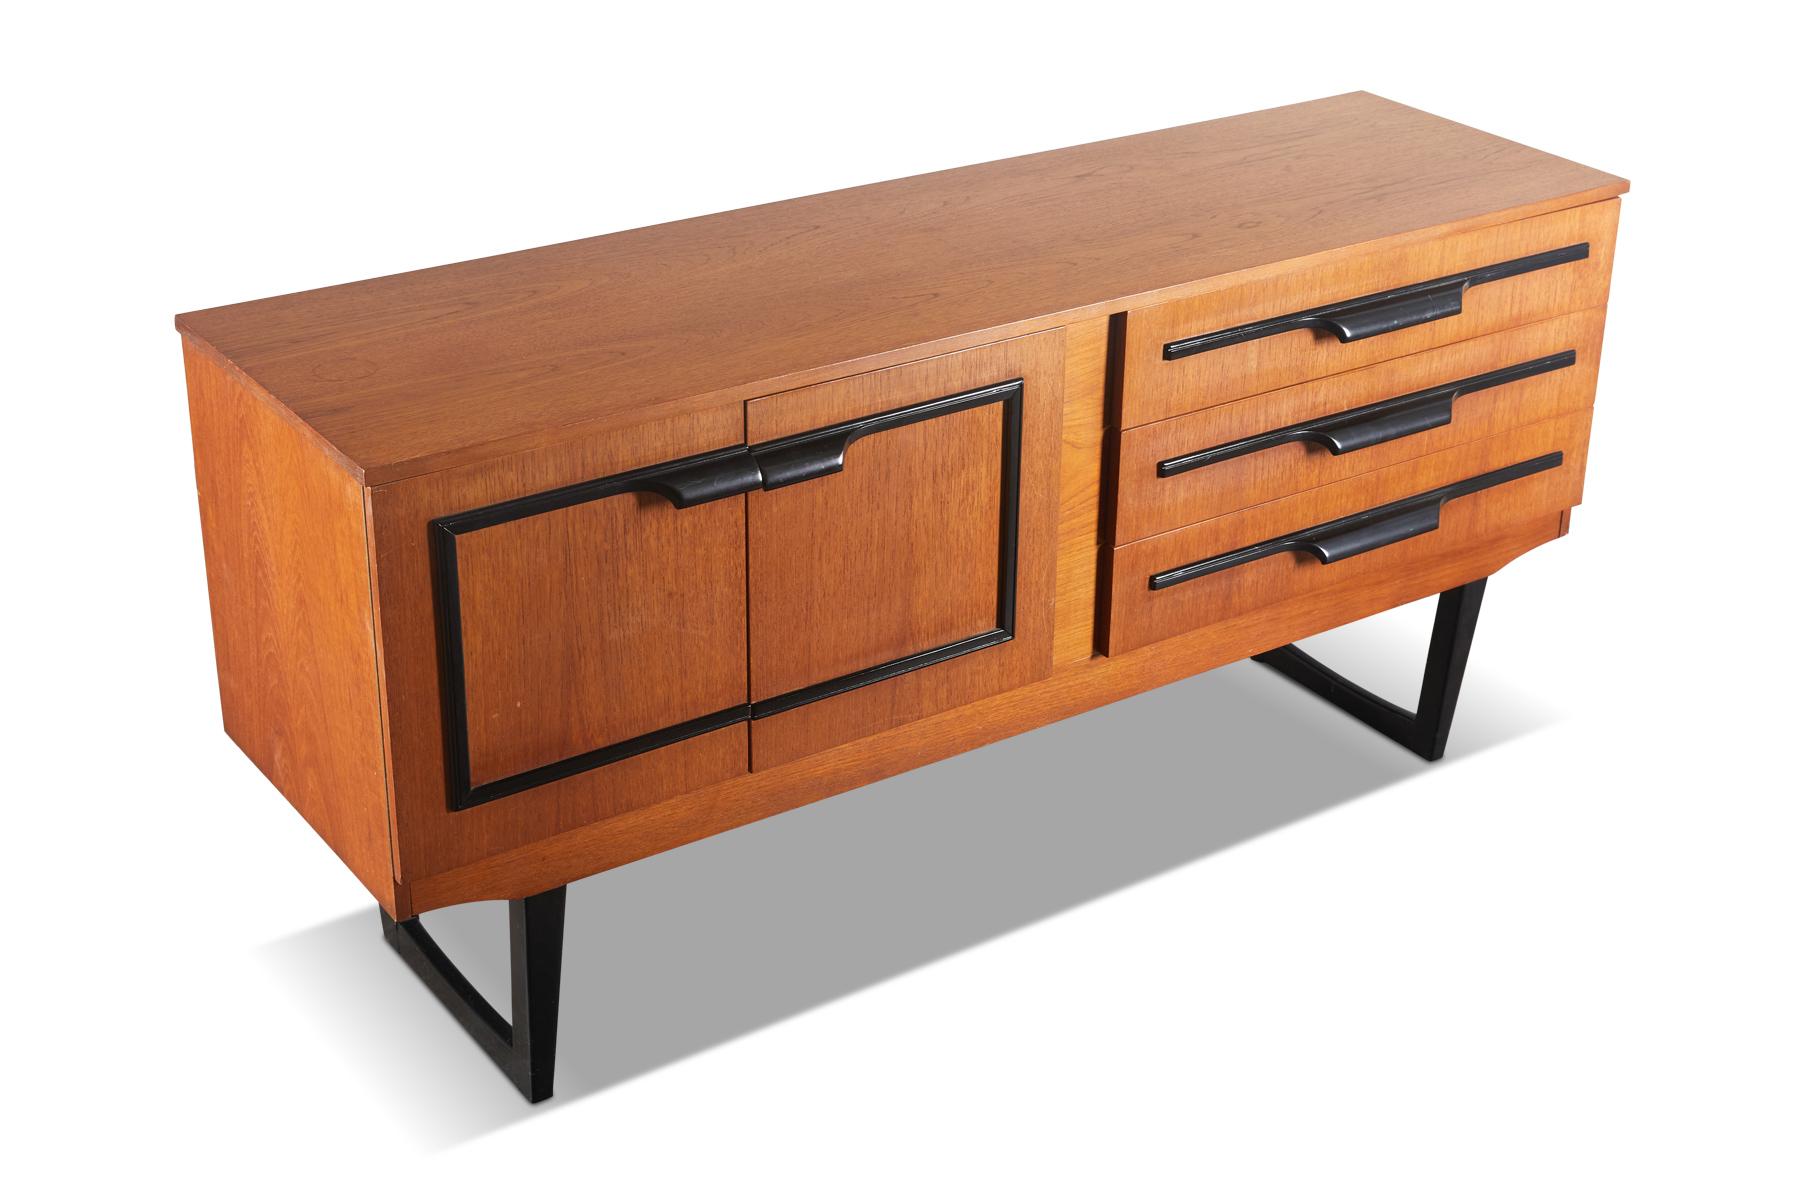 English Modern Midcentury Credenza in Teak with Black Lacquer Accents For Sale 5